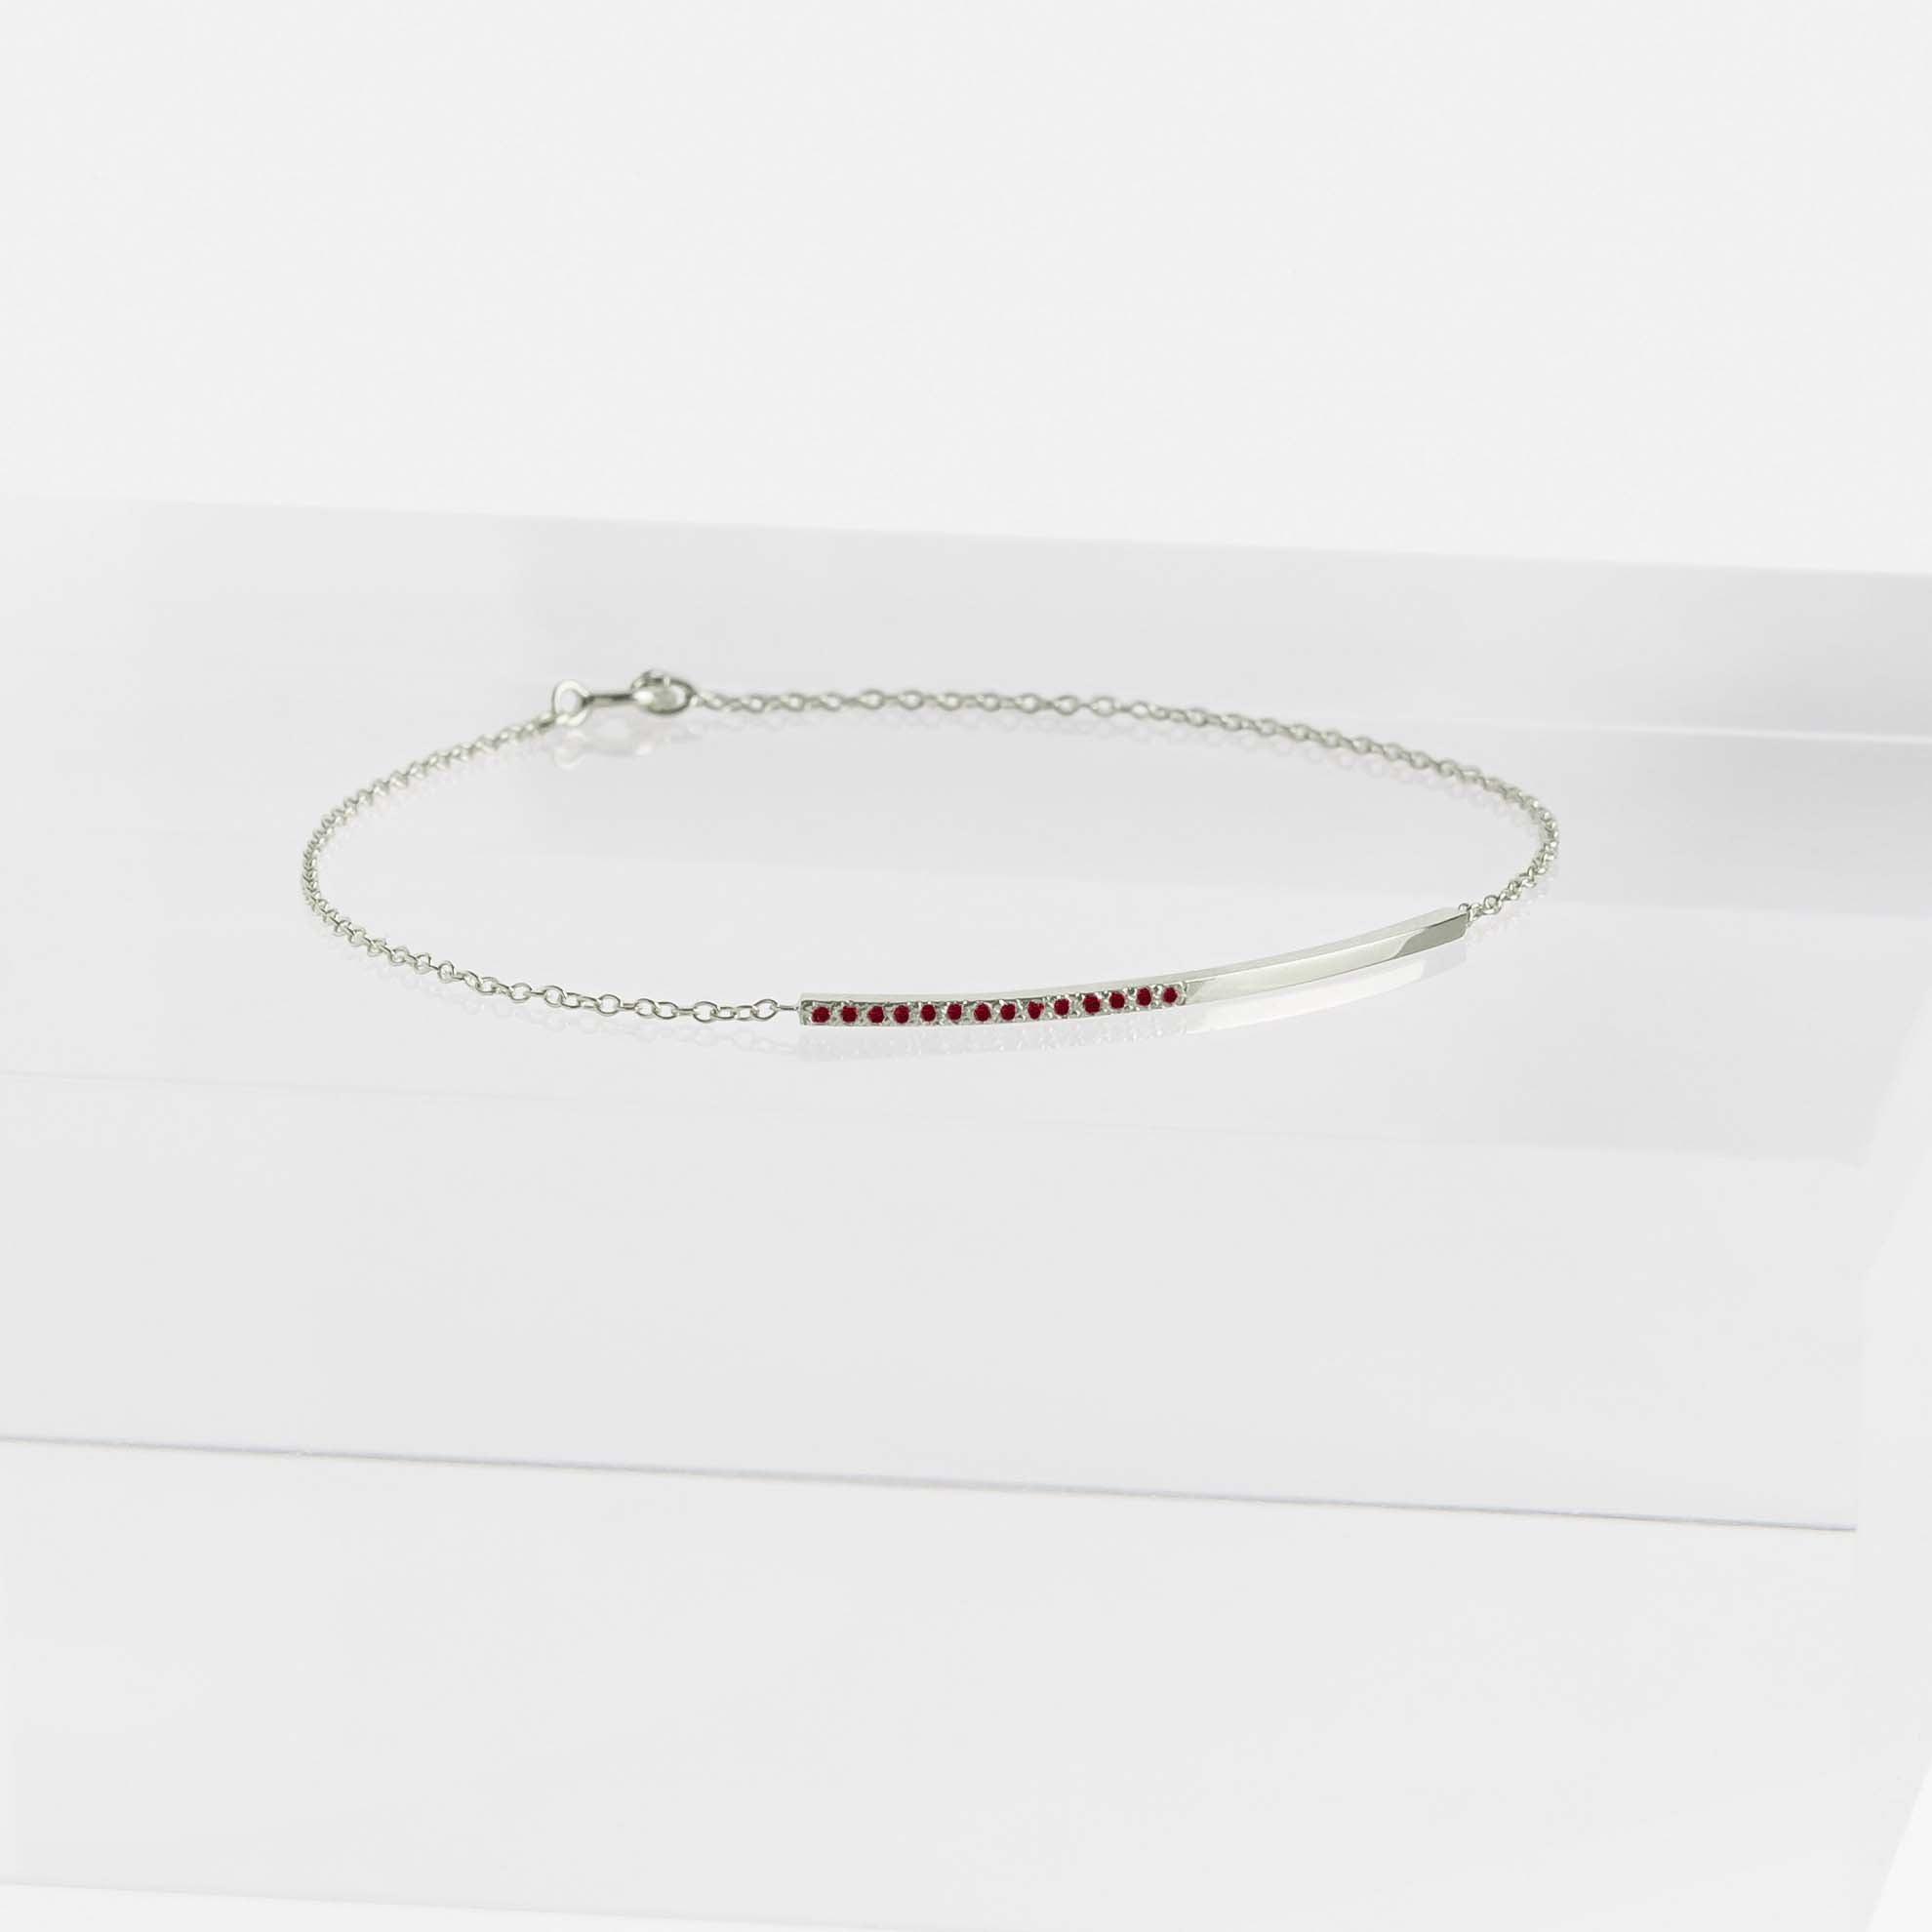 Iva Simple Bracelet in 14k White Gold set with Rubies By SHW Fine Jewelry NYC